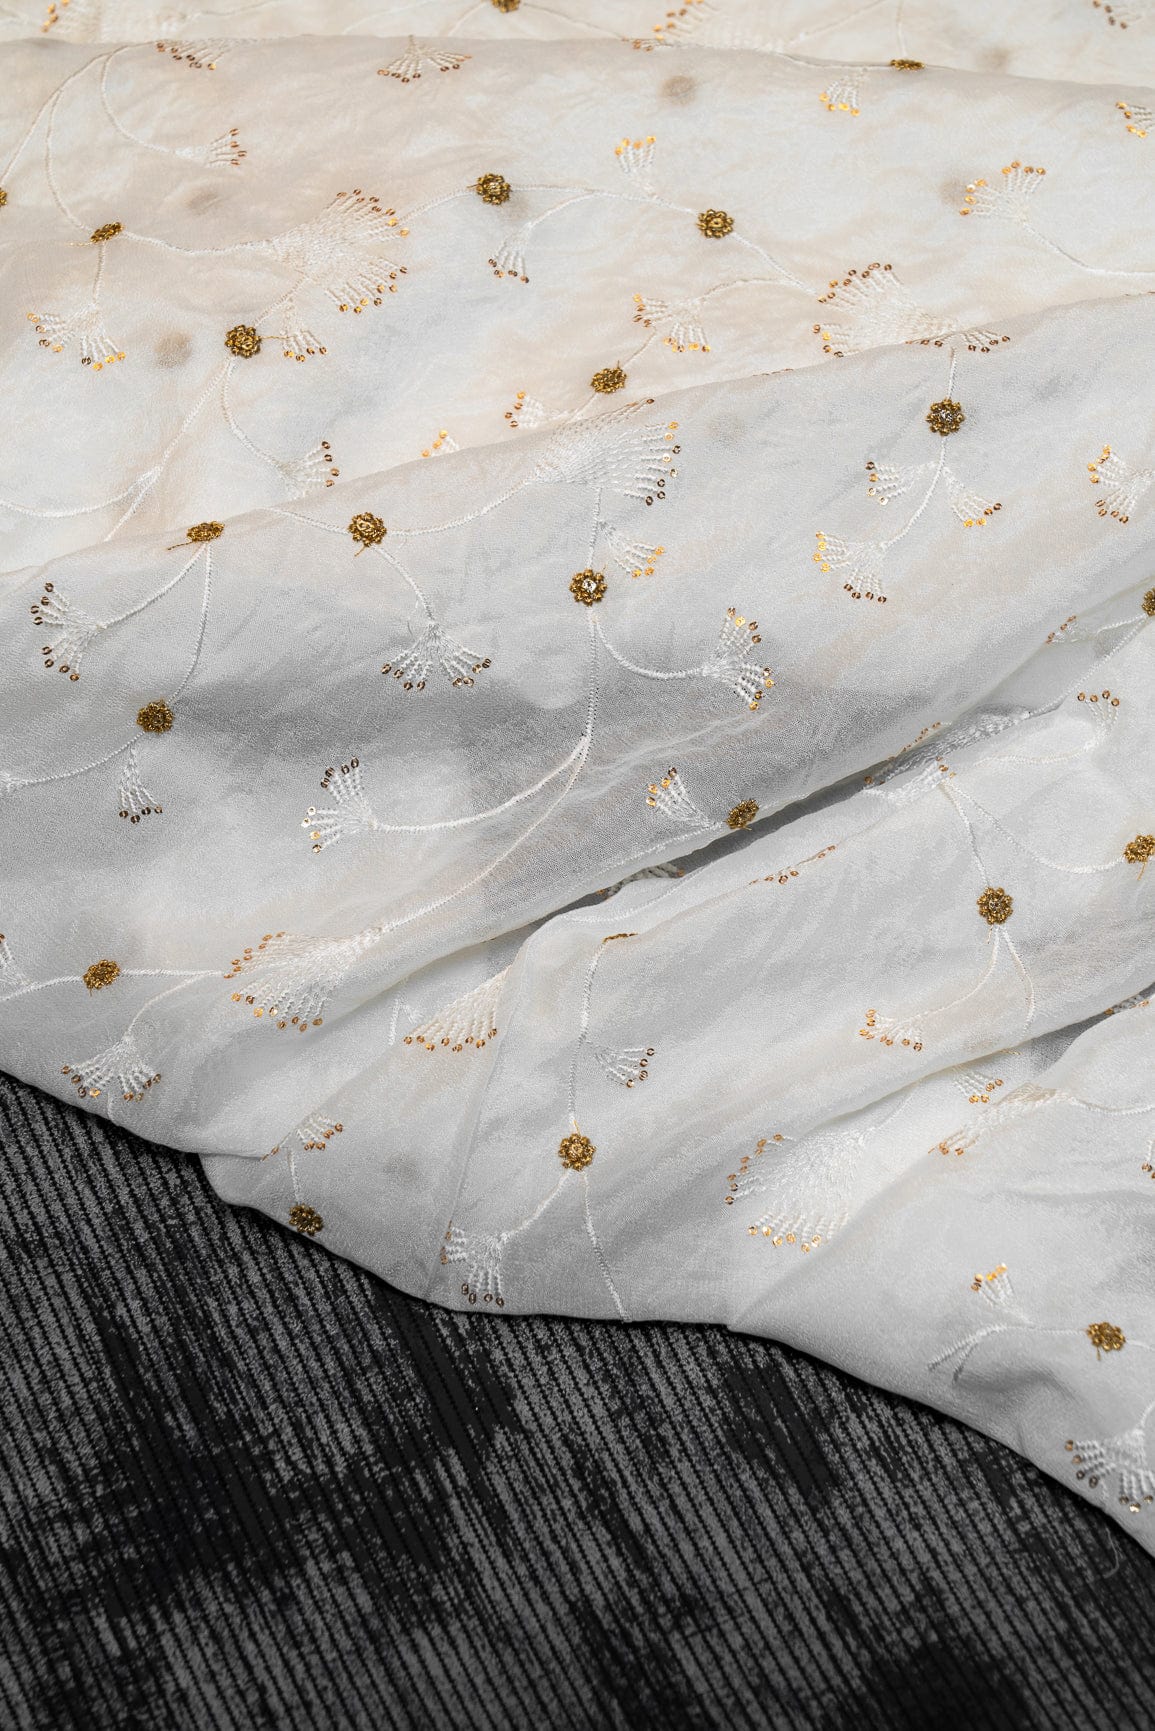 doeraa Embroidery Fabrics Gold Sequins With White Thread Floral Embroidery On Dyeable Natural  Crape